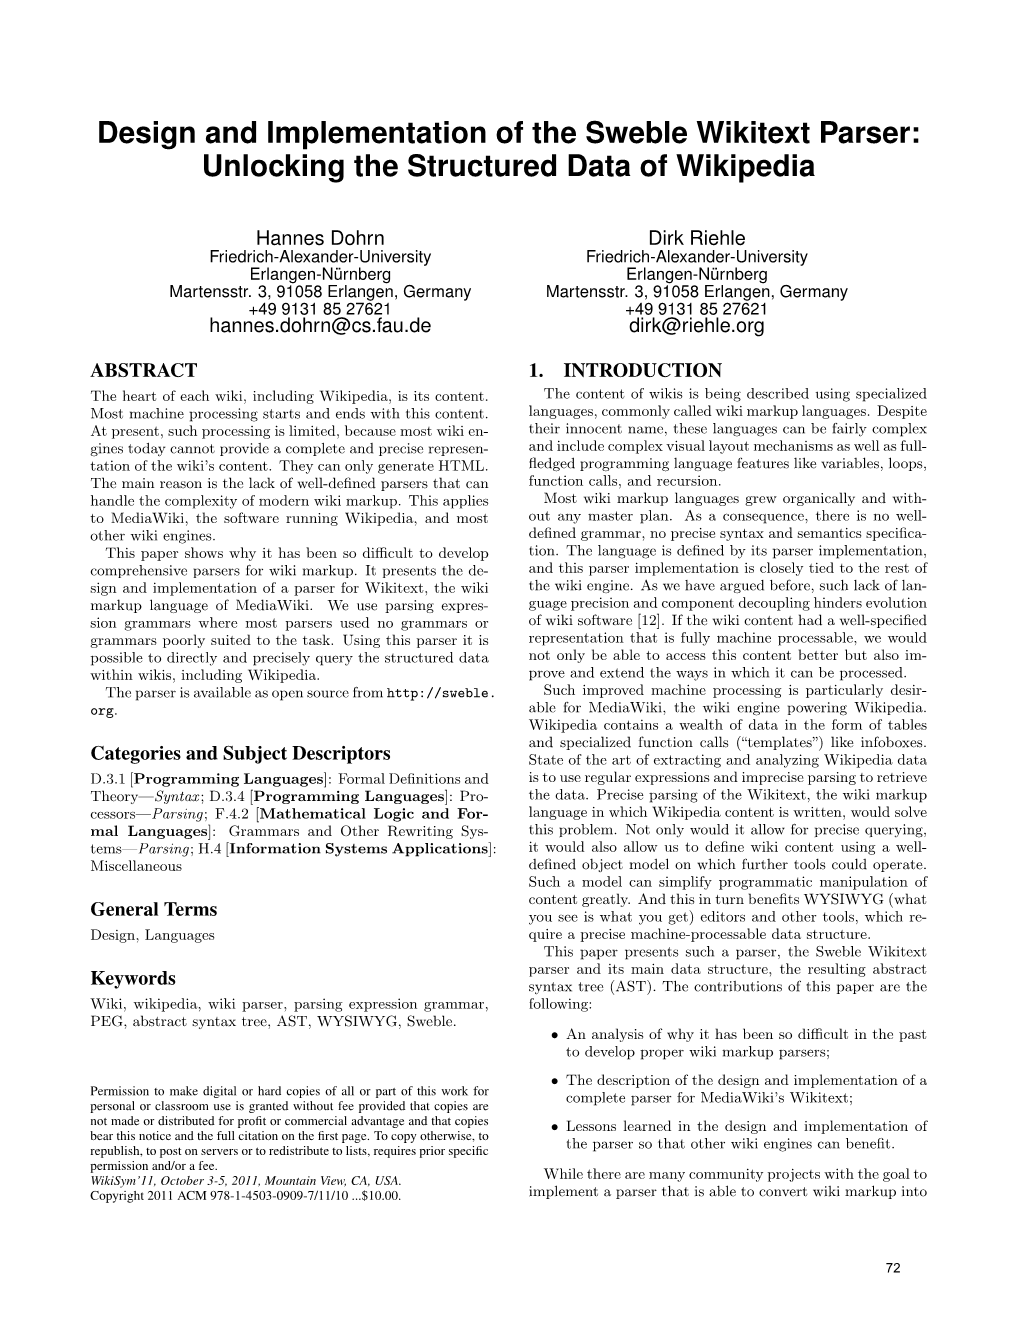 Design and Implementation of the Sweble Wikitext Parser: Unlocking the Structured Data of Wikipedia